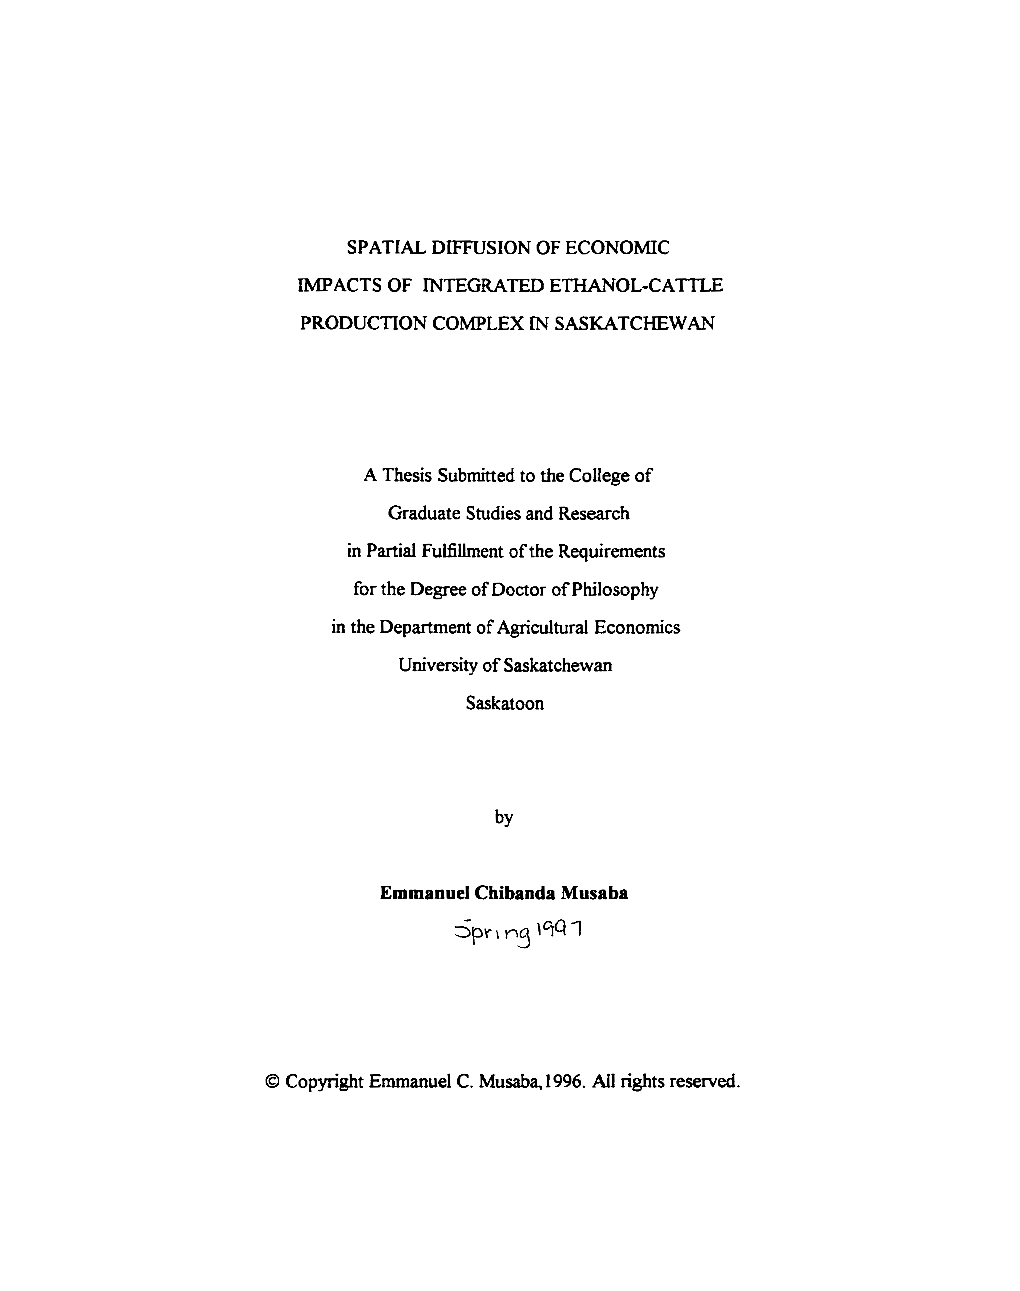 SPATIAL DIFFUSION of ECONOMIC IMPACTS of INTEGRATED ETHANOL-CATTLE PRODUCTION COMPLEX in SASKATCHEWAN a Thesis Submitted To